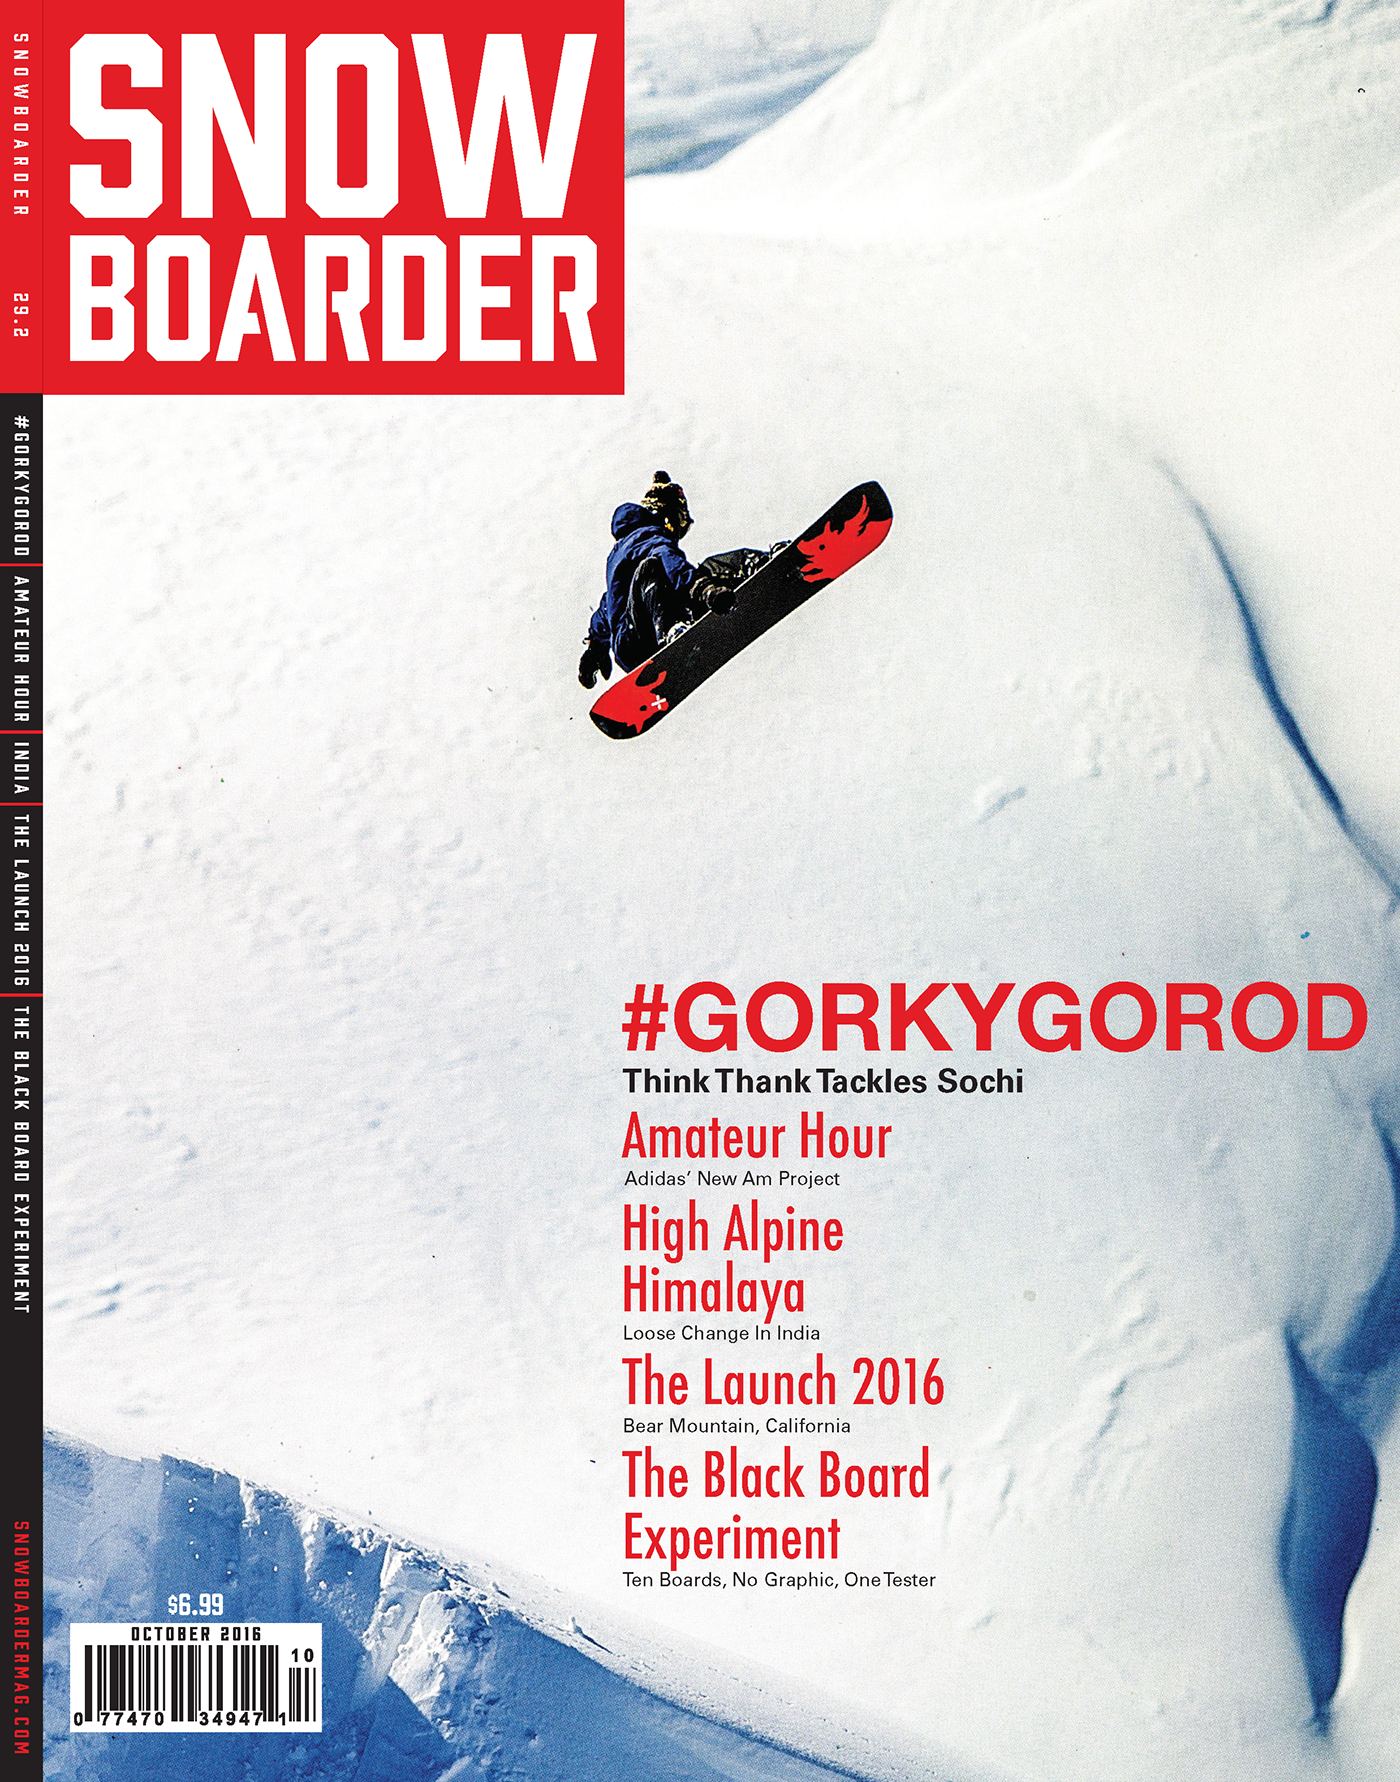 collateral By the way Analyst Snowboarder Magazine Redesign on Behance